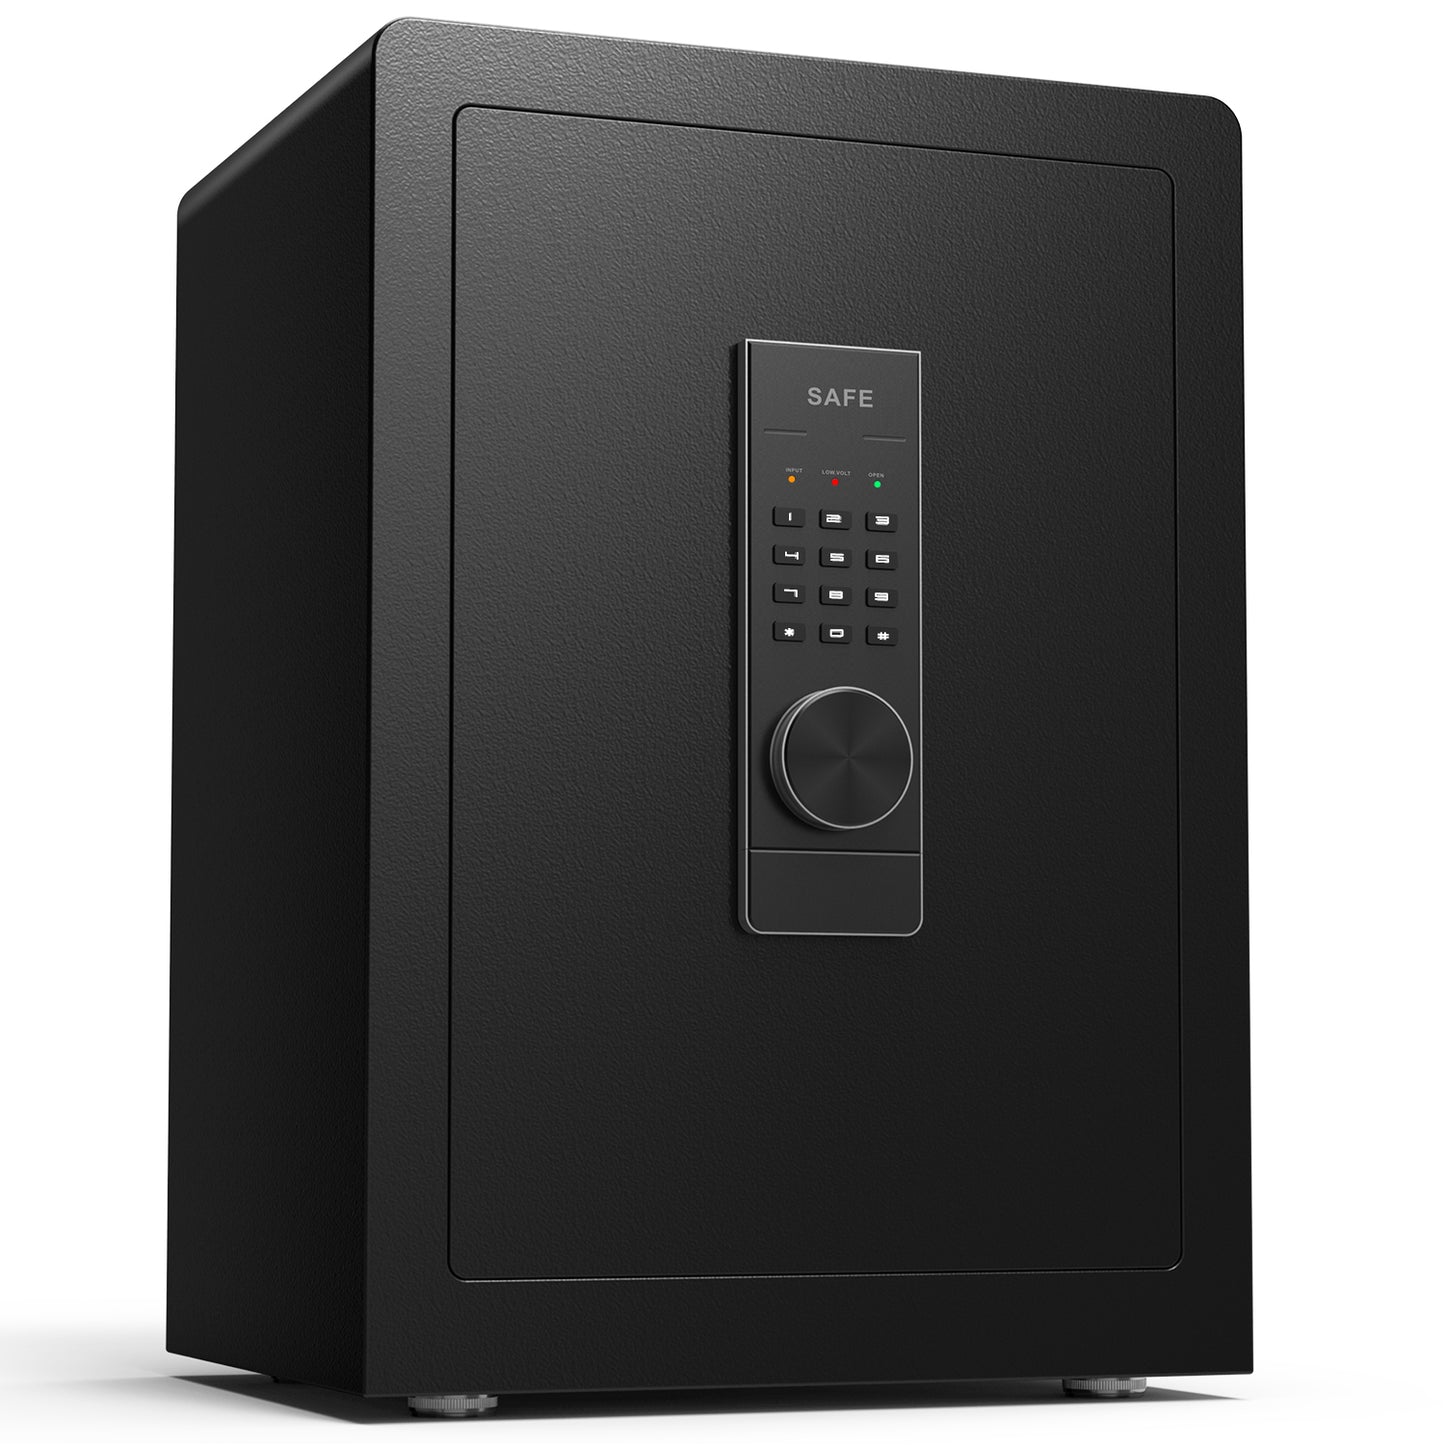 Steel safe box with Electronic Keypad, Perfect for Home, Office, Hotel, ,Business storage, 22.05x15.75x12.99 Inches, black